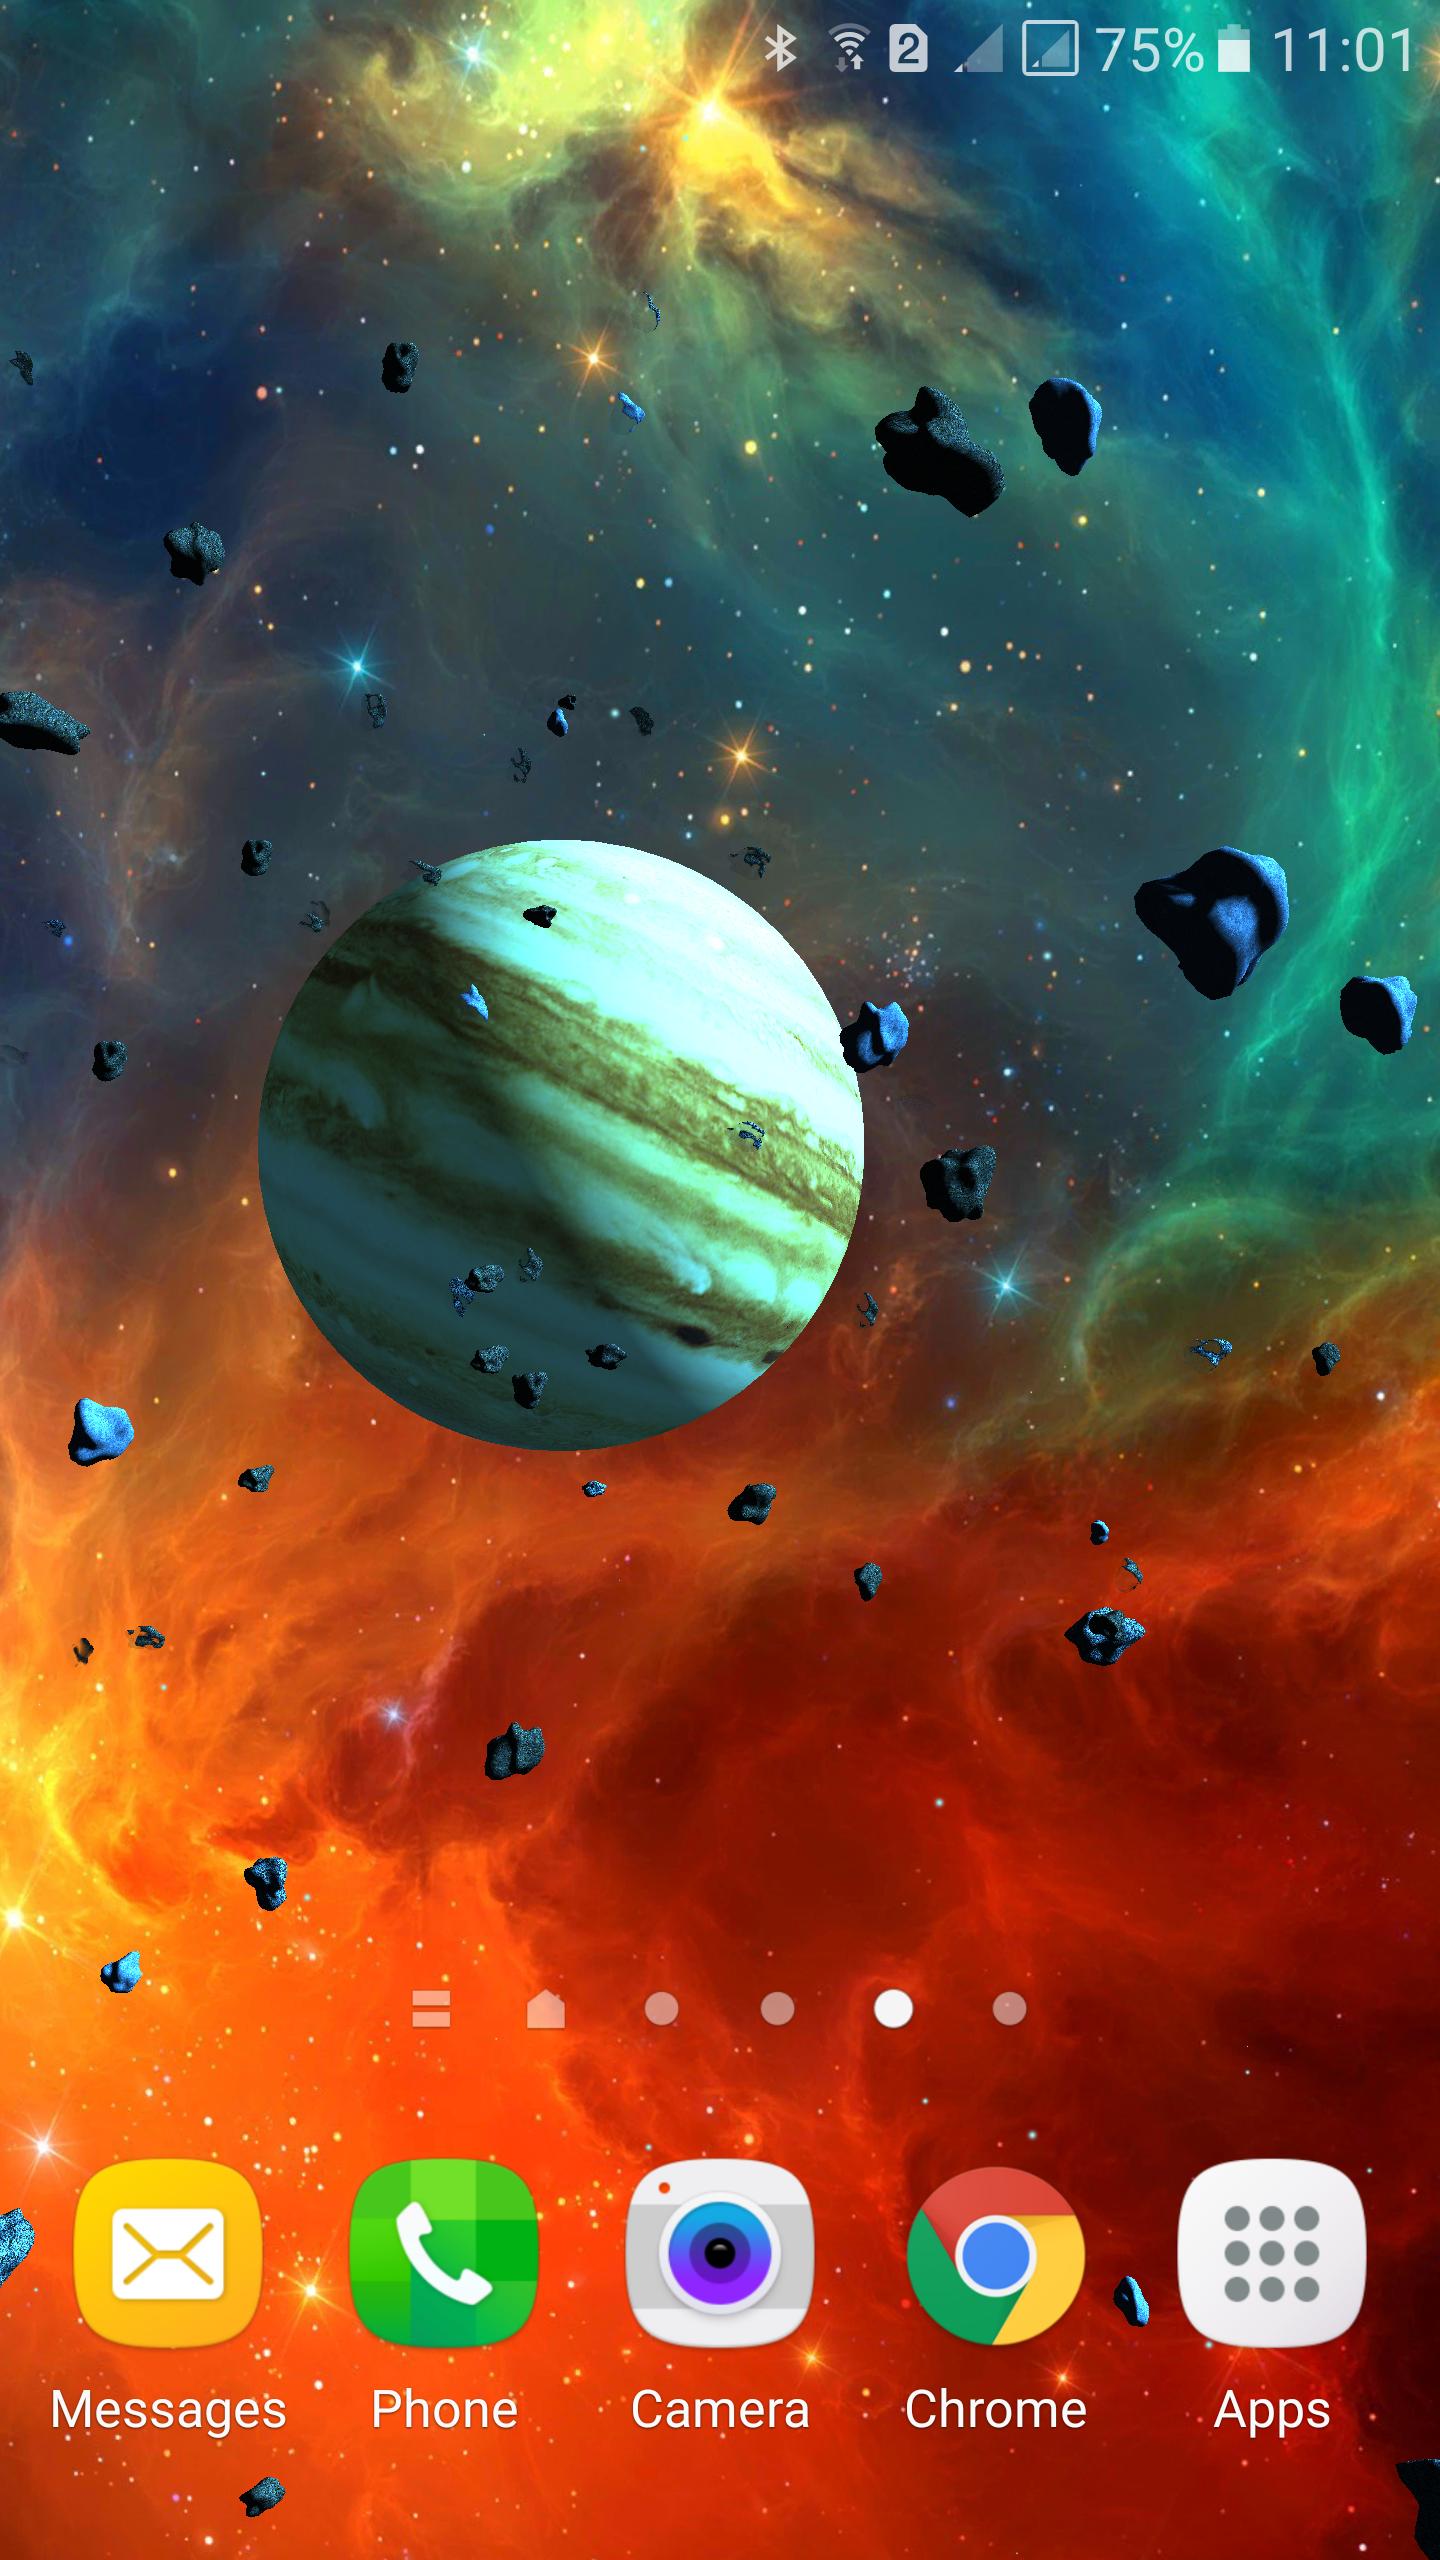 Asteroids 3d Live Wallpaper For Android Apk Download